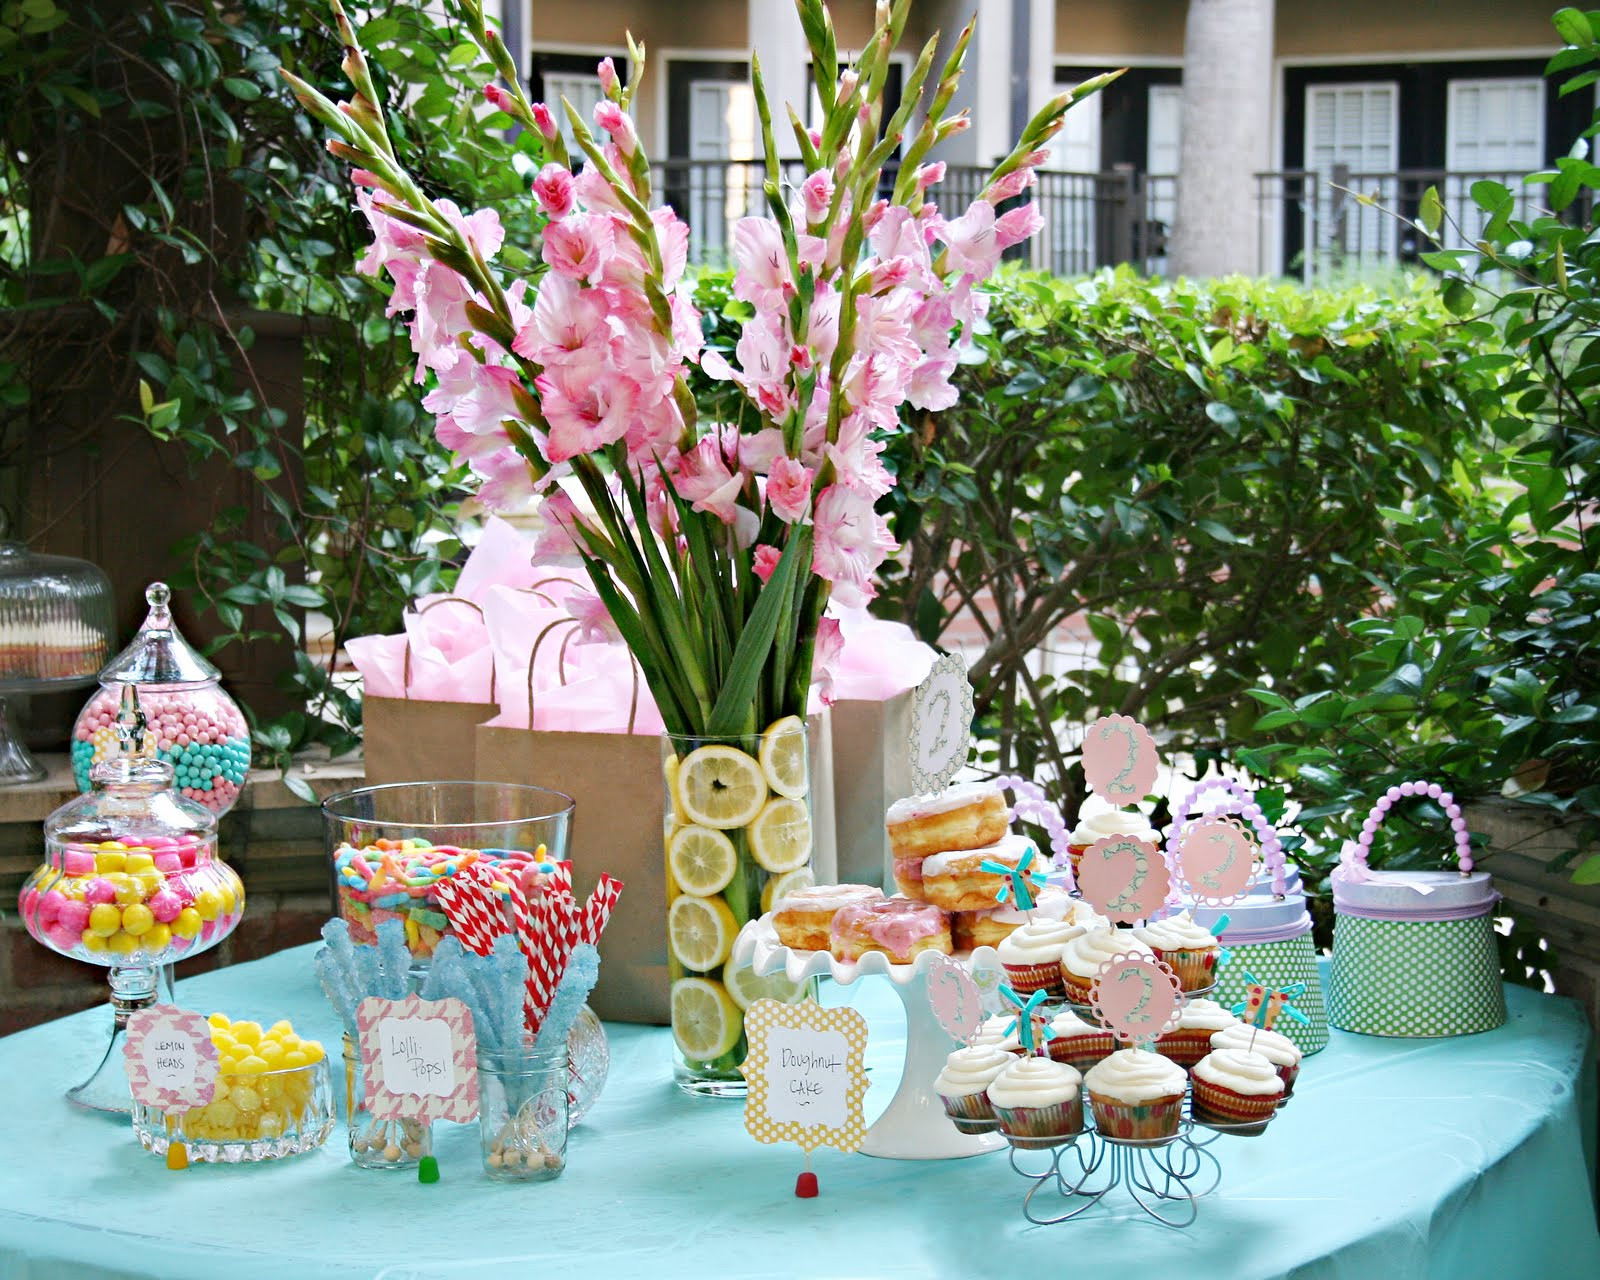 Pool Party Ideas For Sweet 16
 Cook Bake & Decorate Girly Pool Party